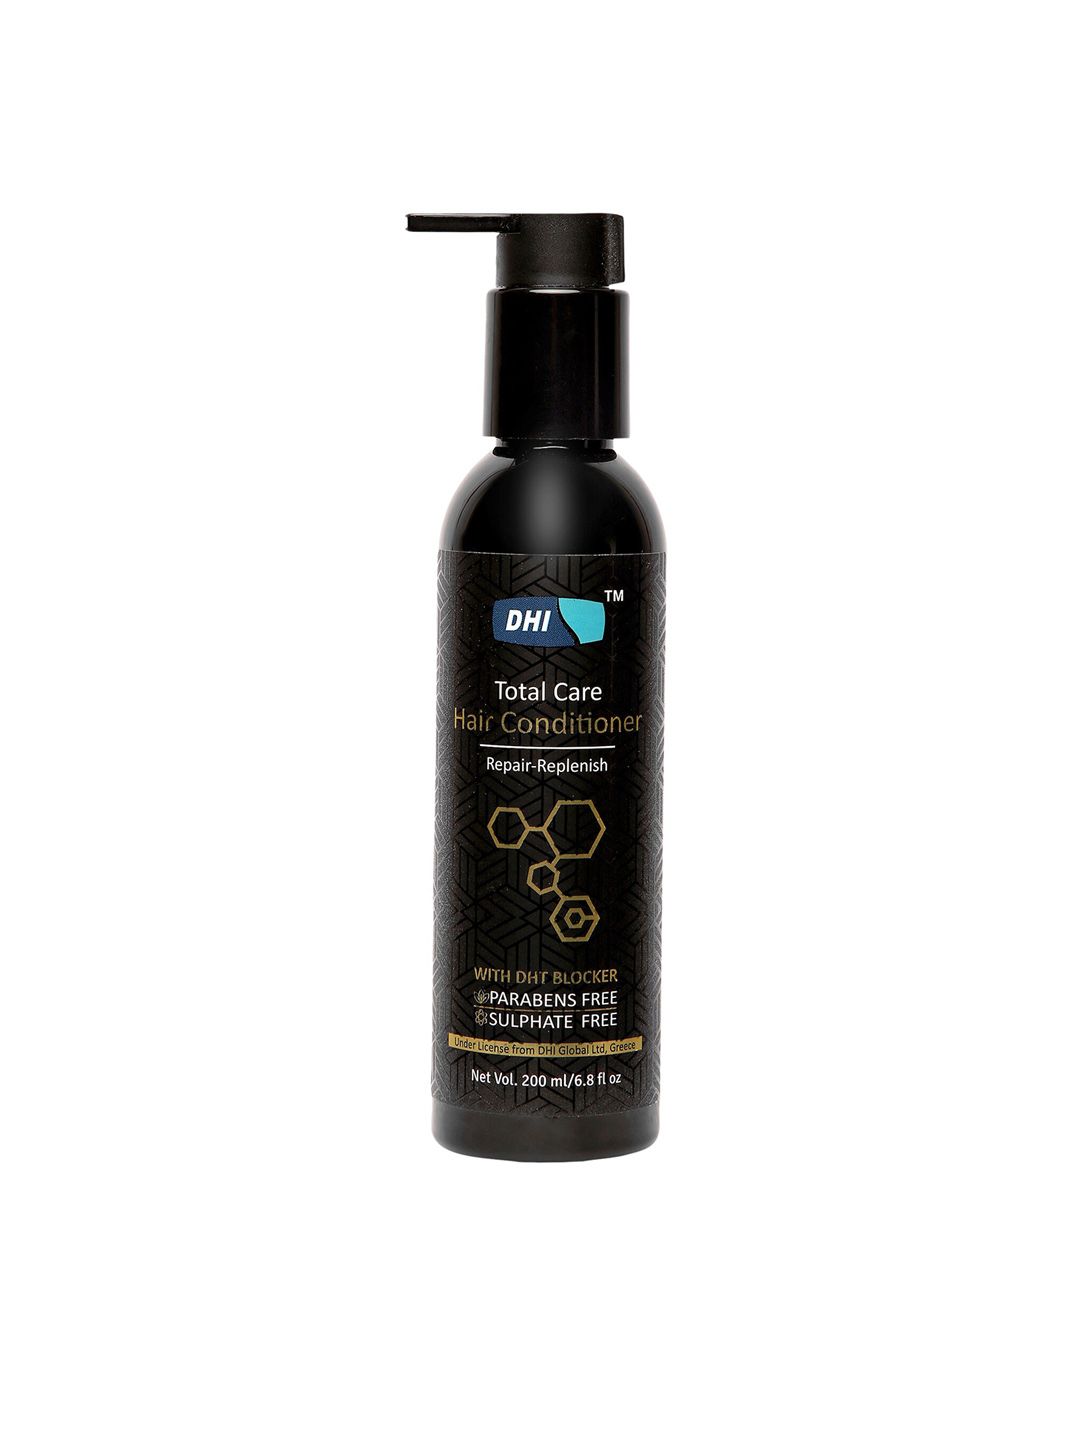 DHI Total Care Hair Conditioner with DHT Blocker - 200ml Price in India